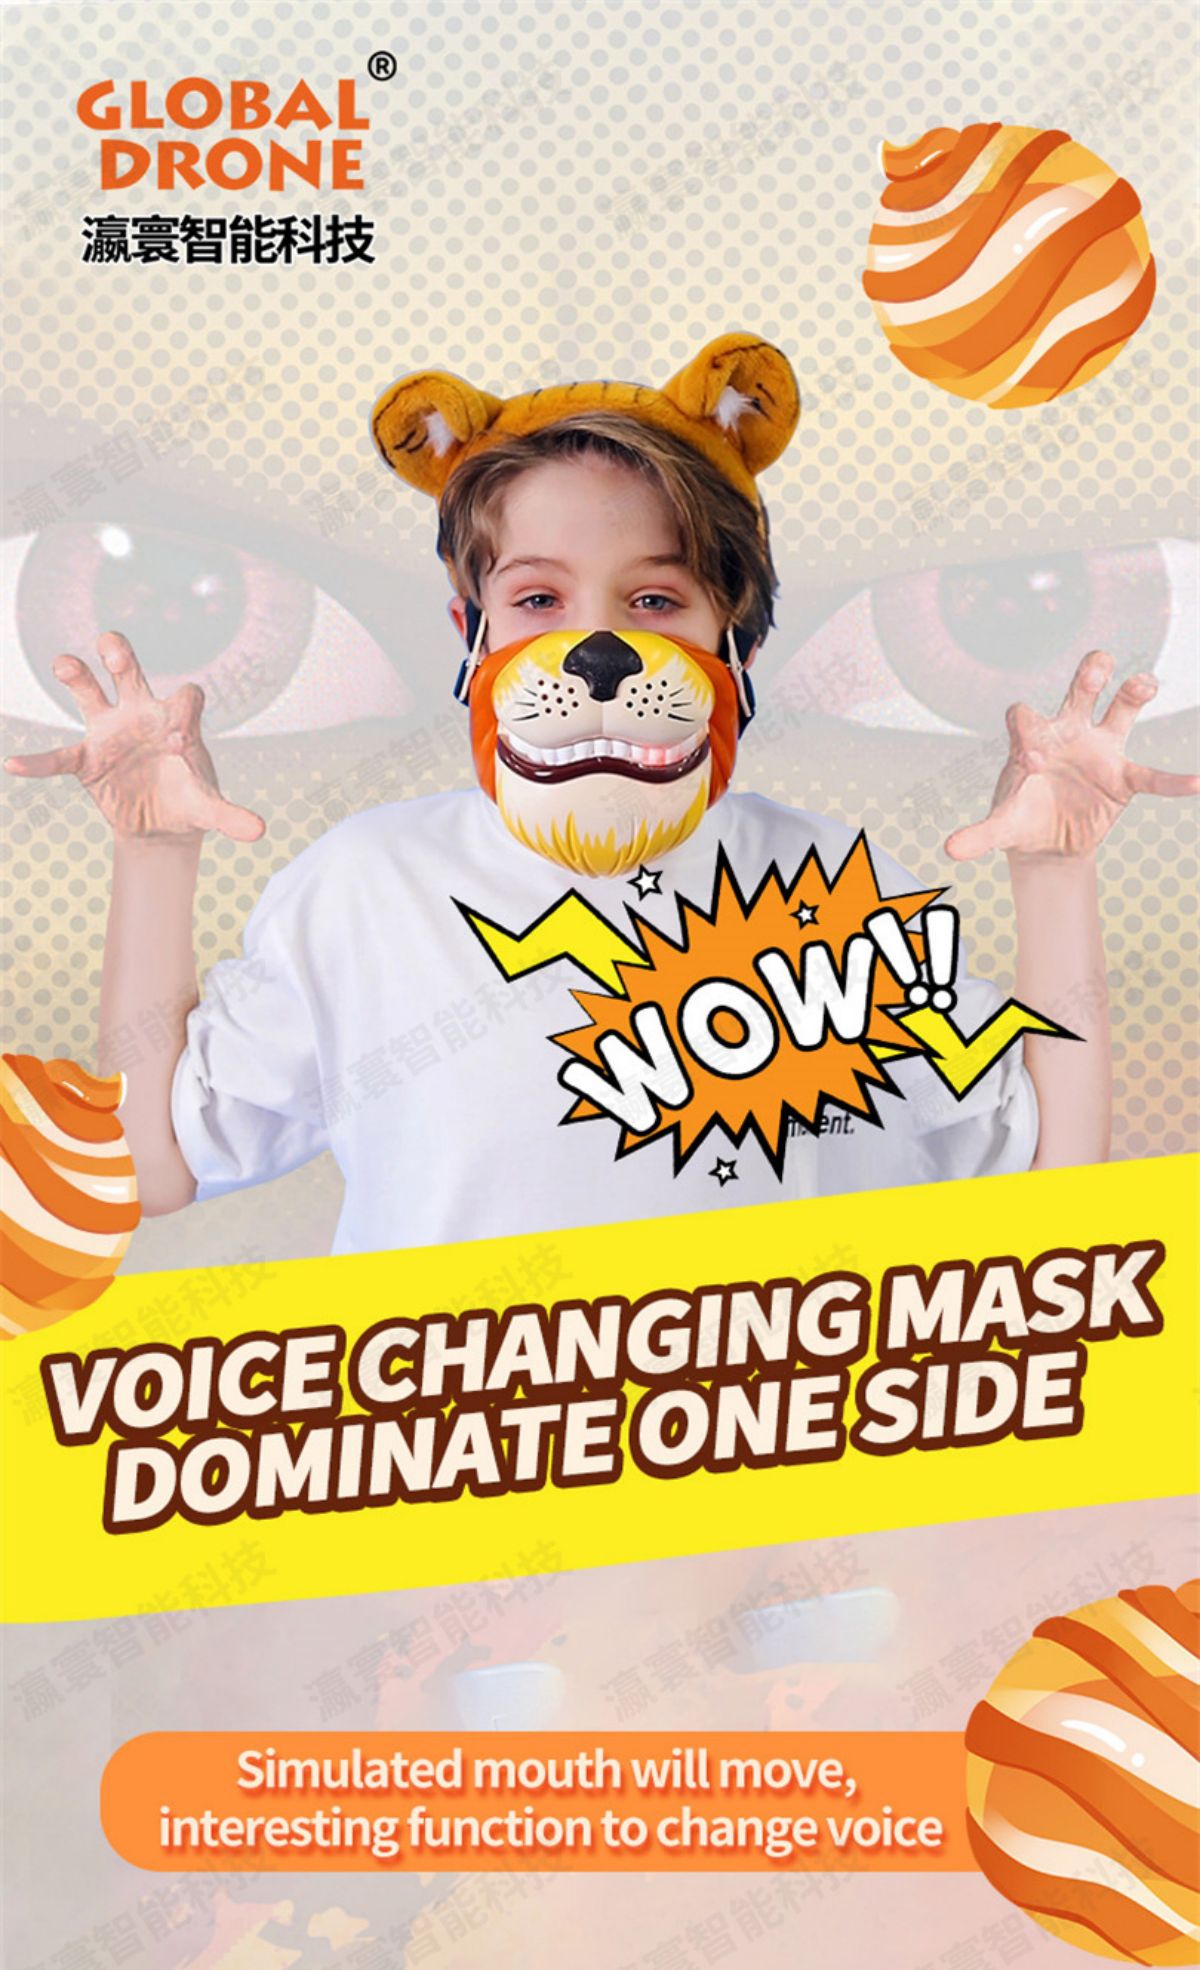 Voice Changing Mask Dominate O1